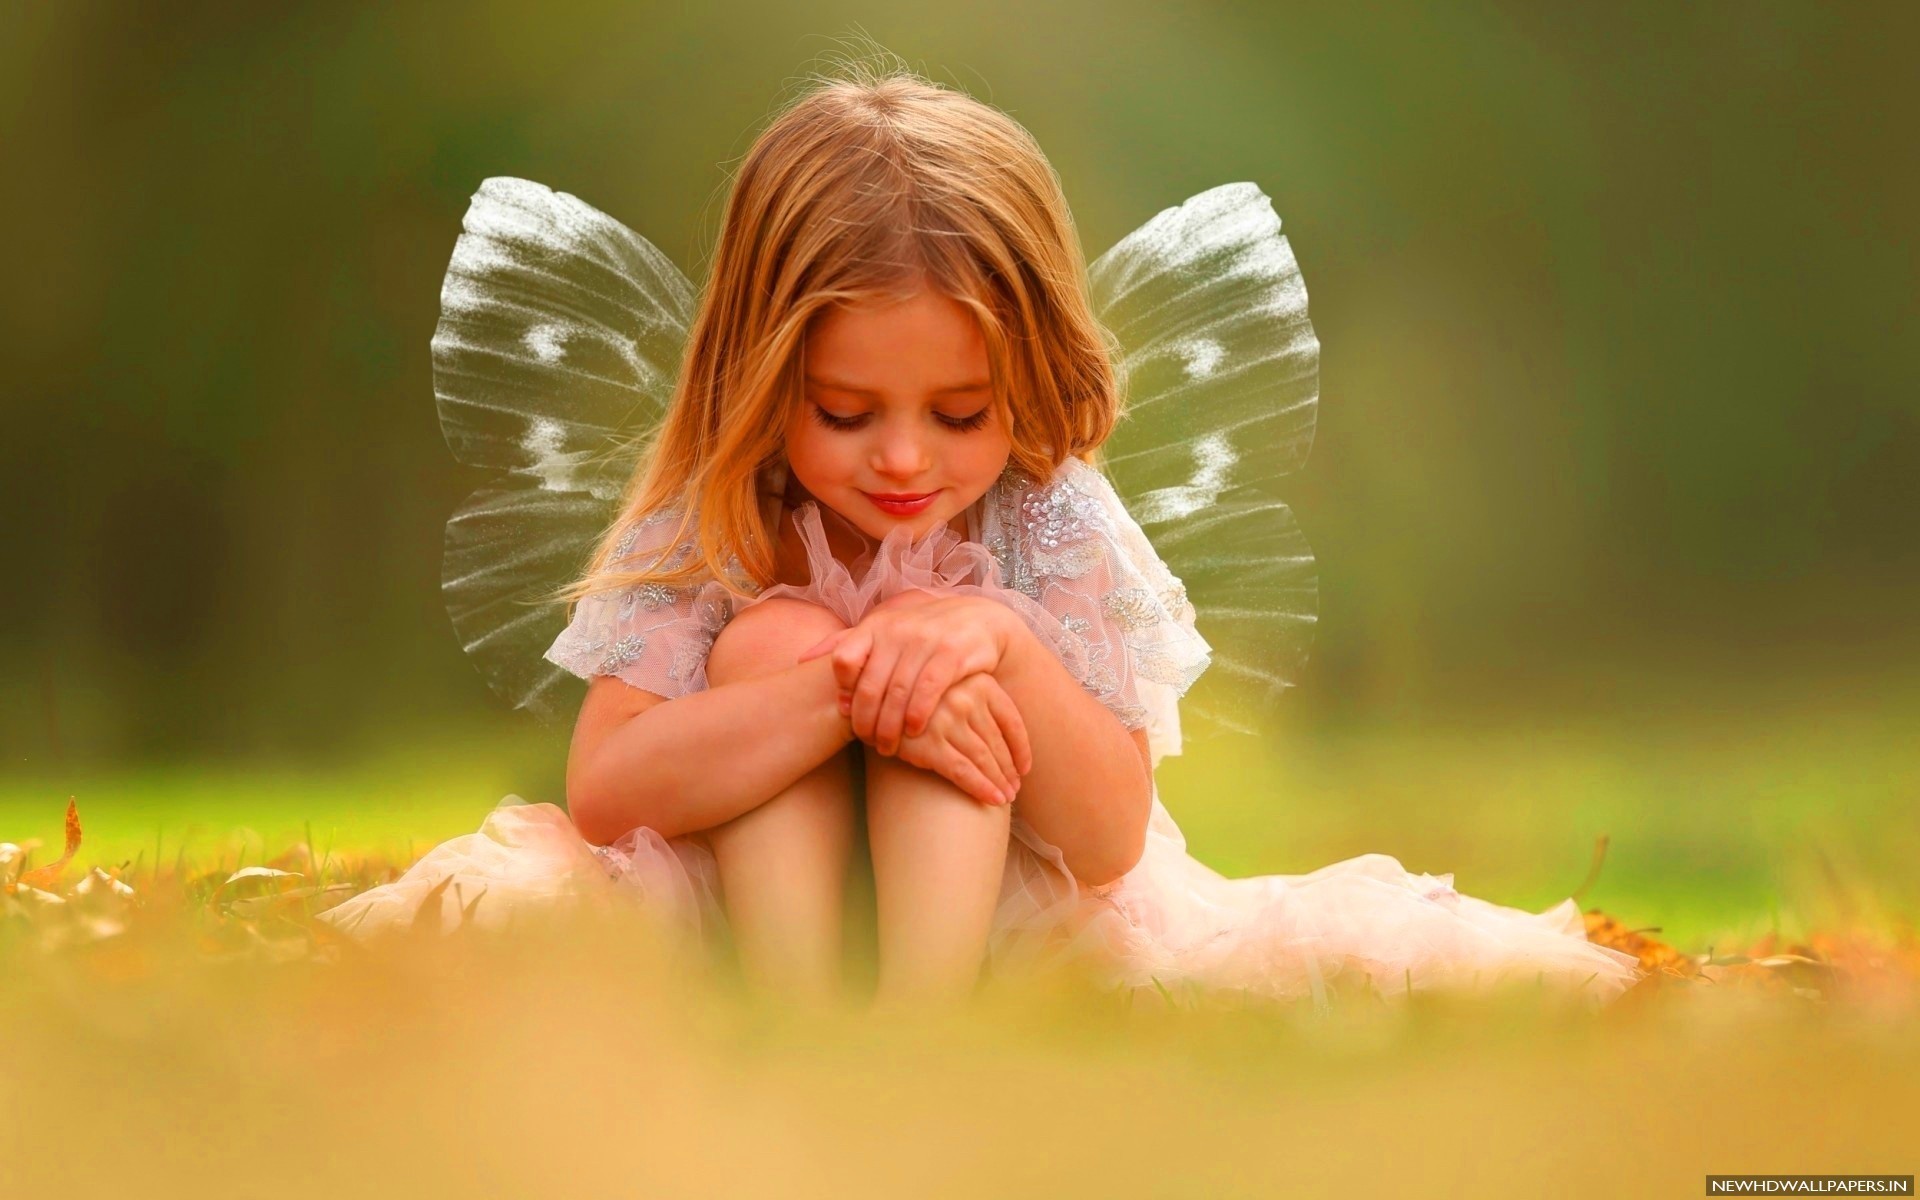 1920x1200 Search Results for “cute angel baby girl wallpapers” – Adorable Wallpapers